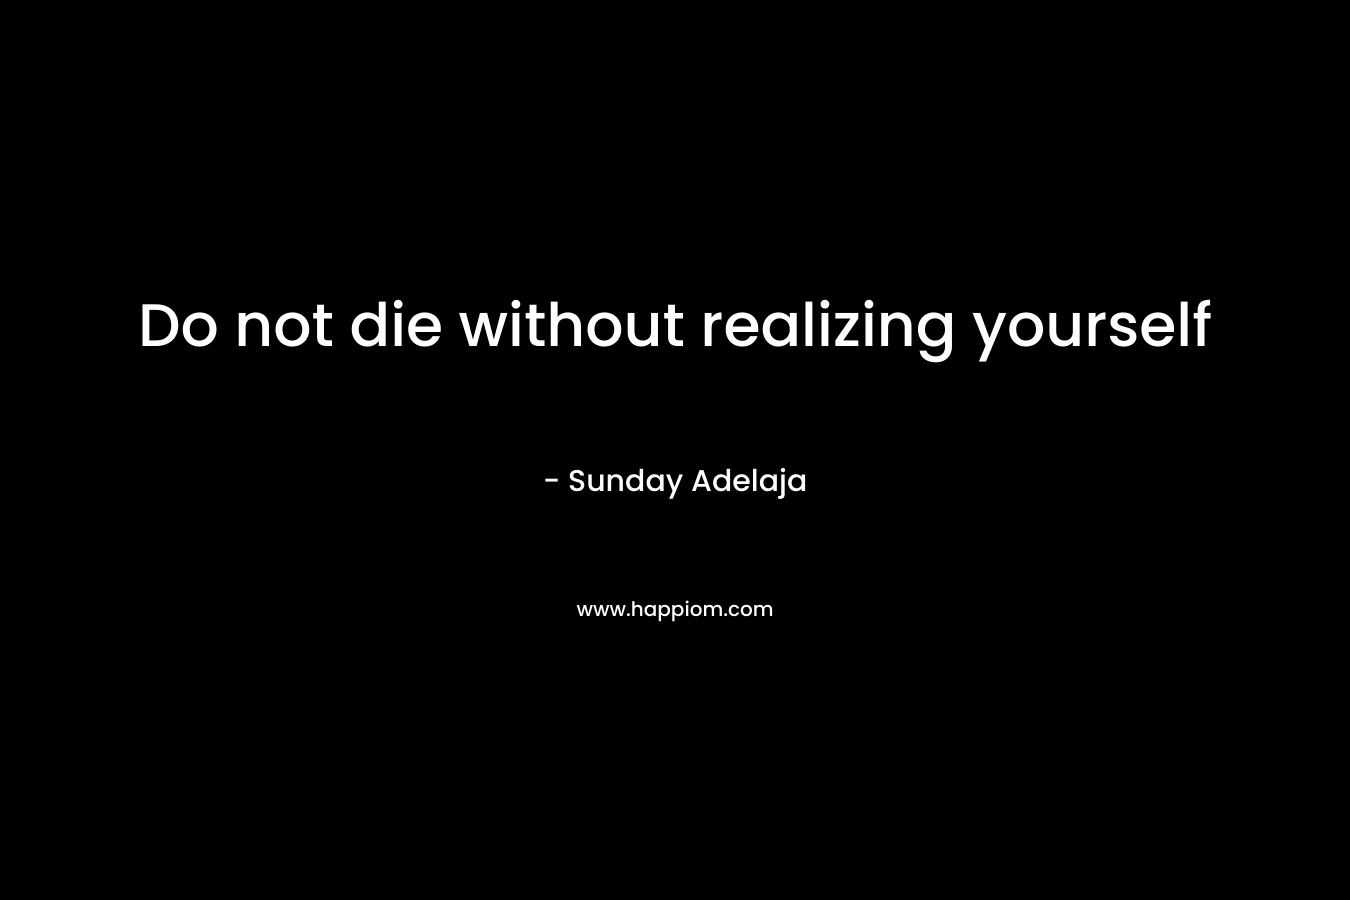 Do not die without realizing yourself